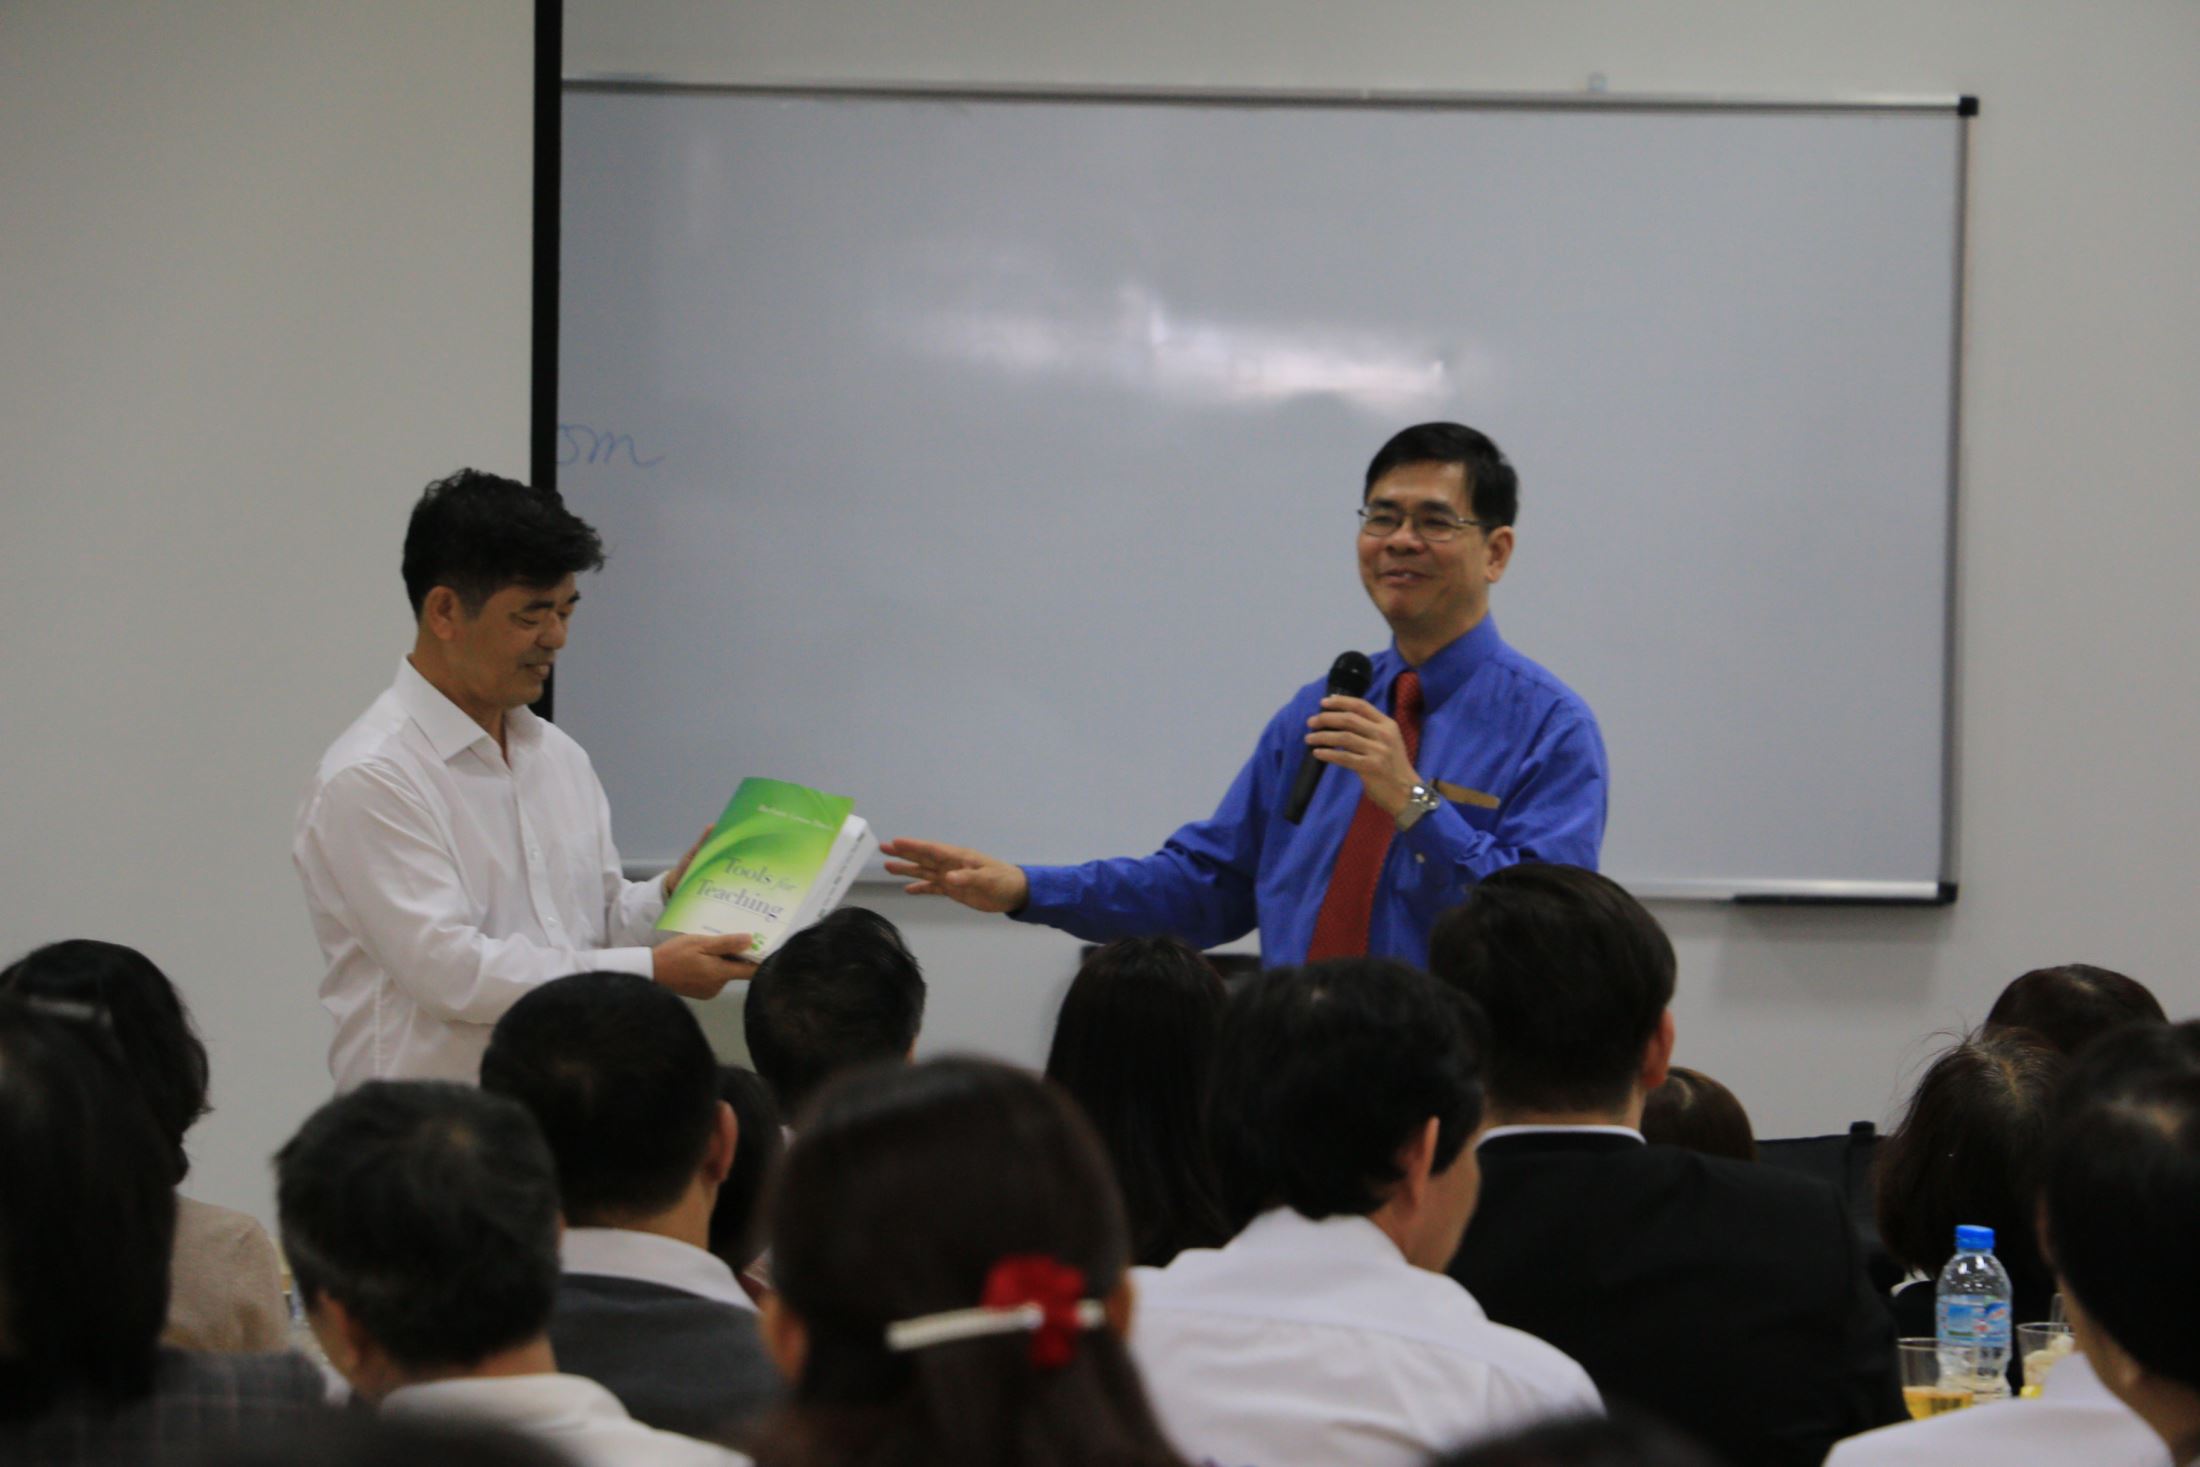 Assoc. Prof. Dr. Thai Ba Can, Principal of HIU to receive a book from Prof. Le Xuan Hy on behalf of HIU staff and student